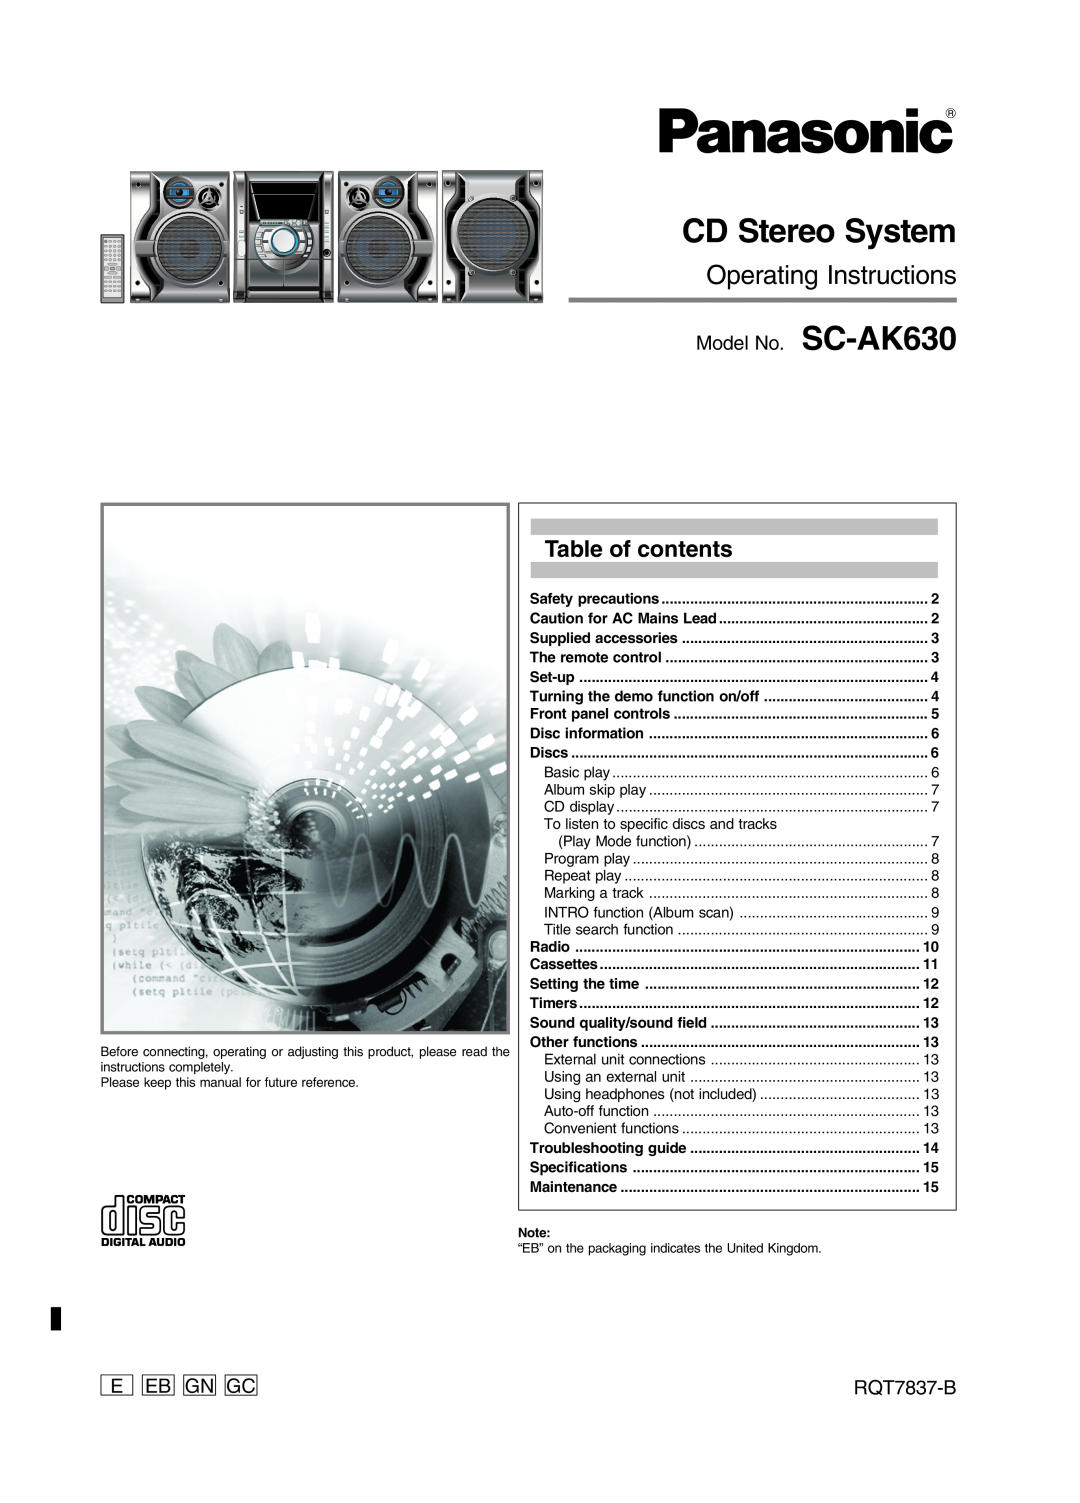 Panasonic specifications Table of contents, Model No. SC-AK630, E Eb Gngc, RQT7837-B, CD Stereo System 